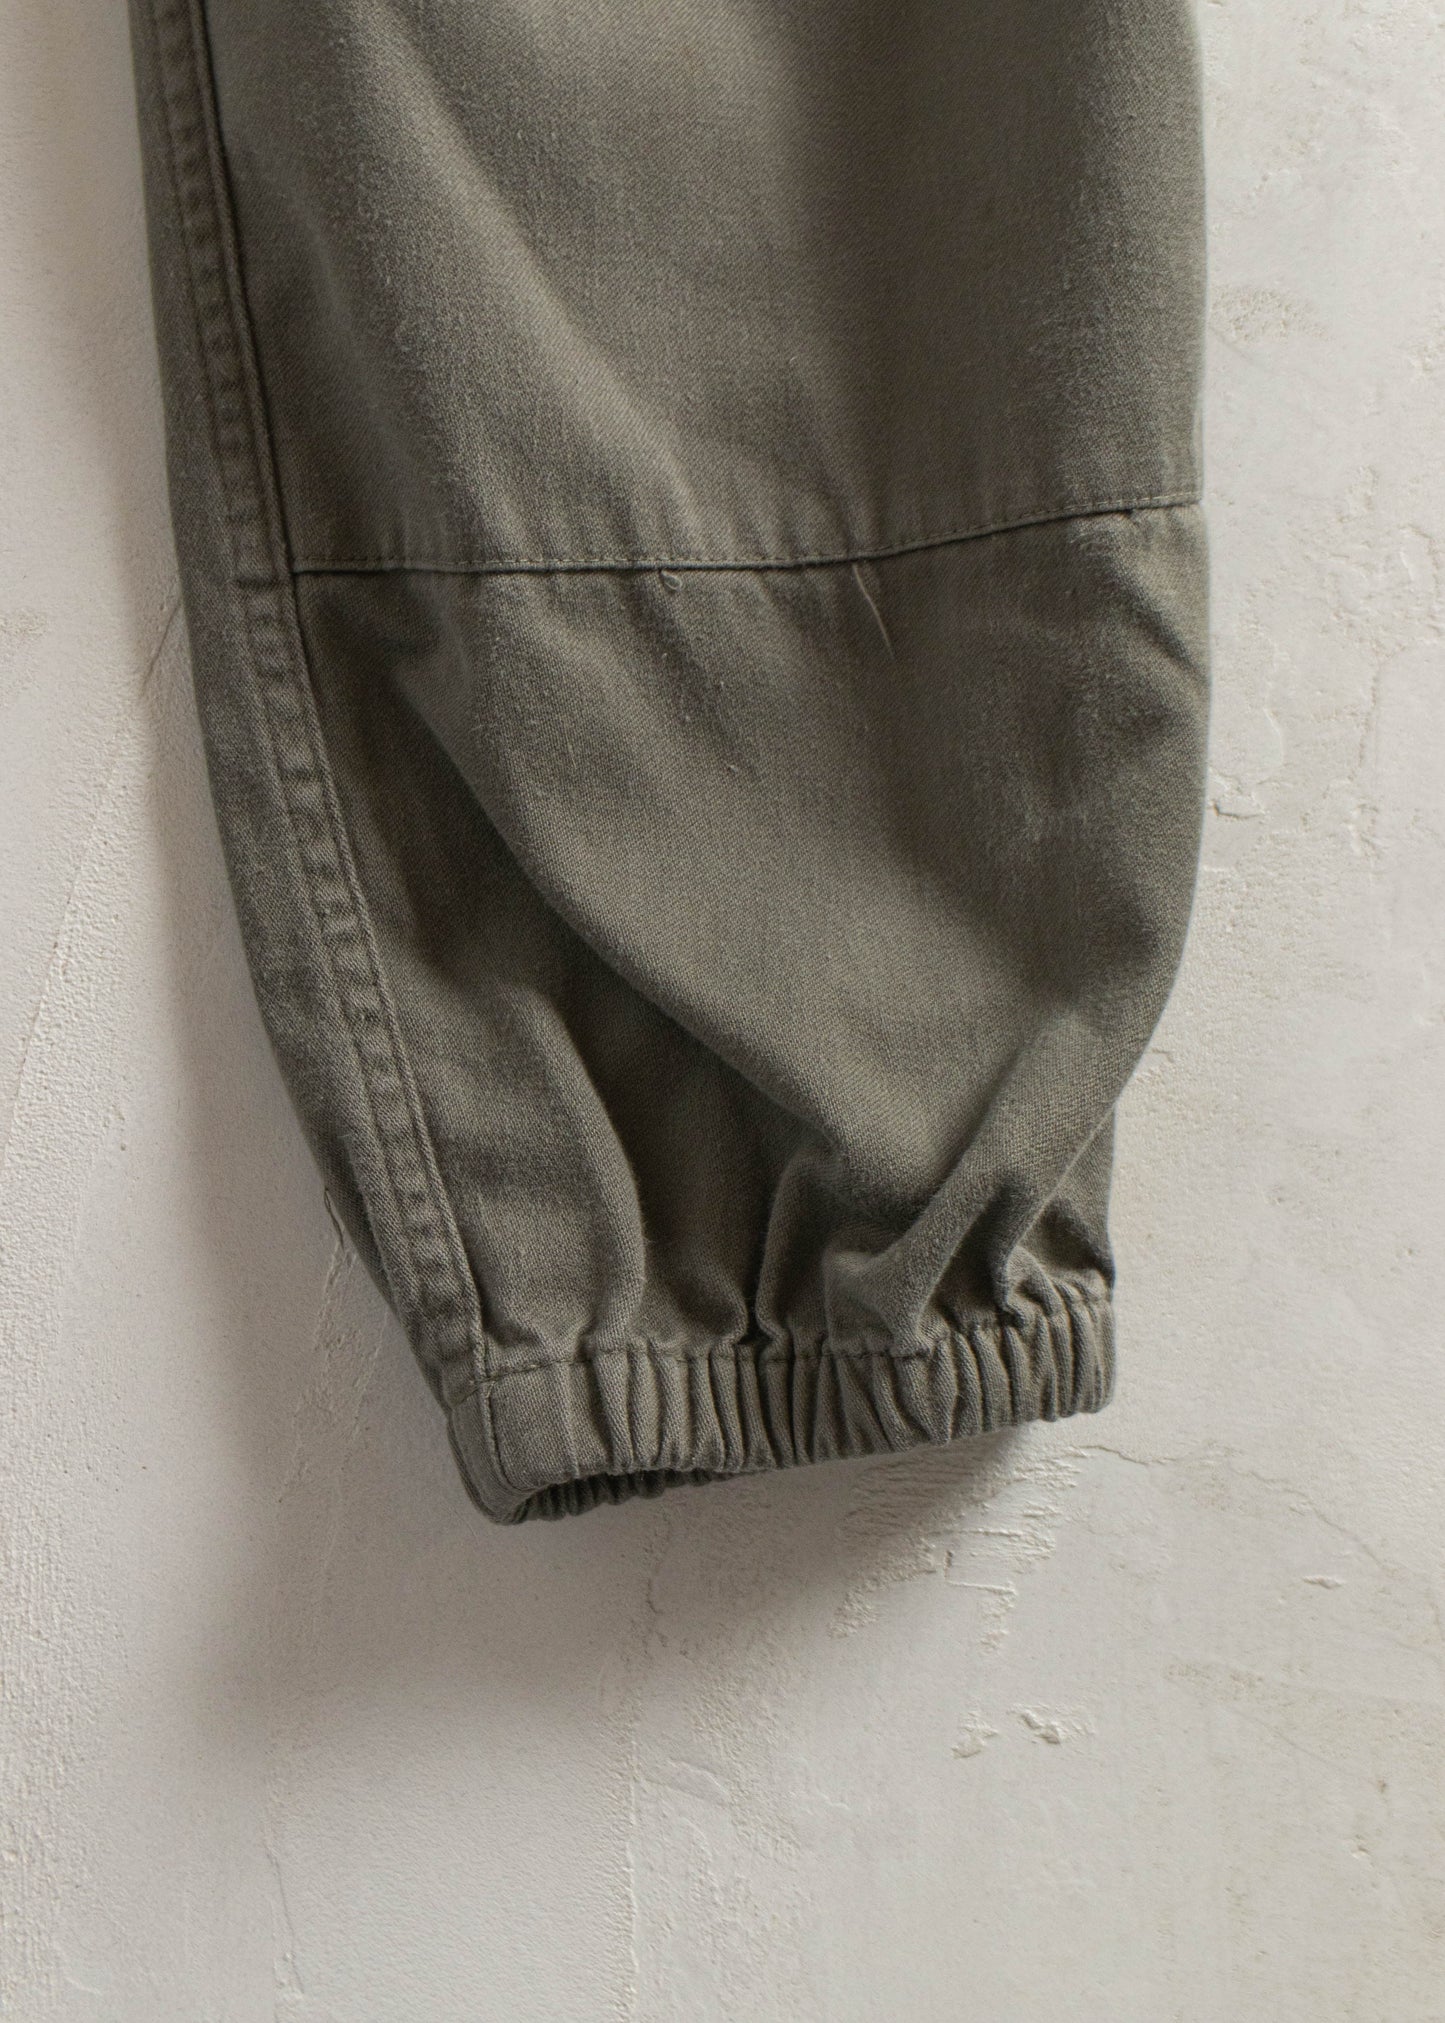 Vintage 1980s French Military Cargo Pants Size Women's 27 Men's 30